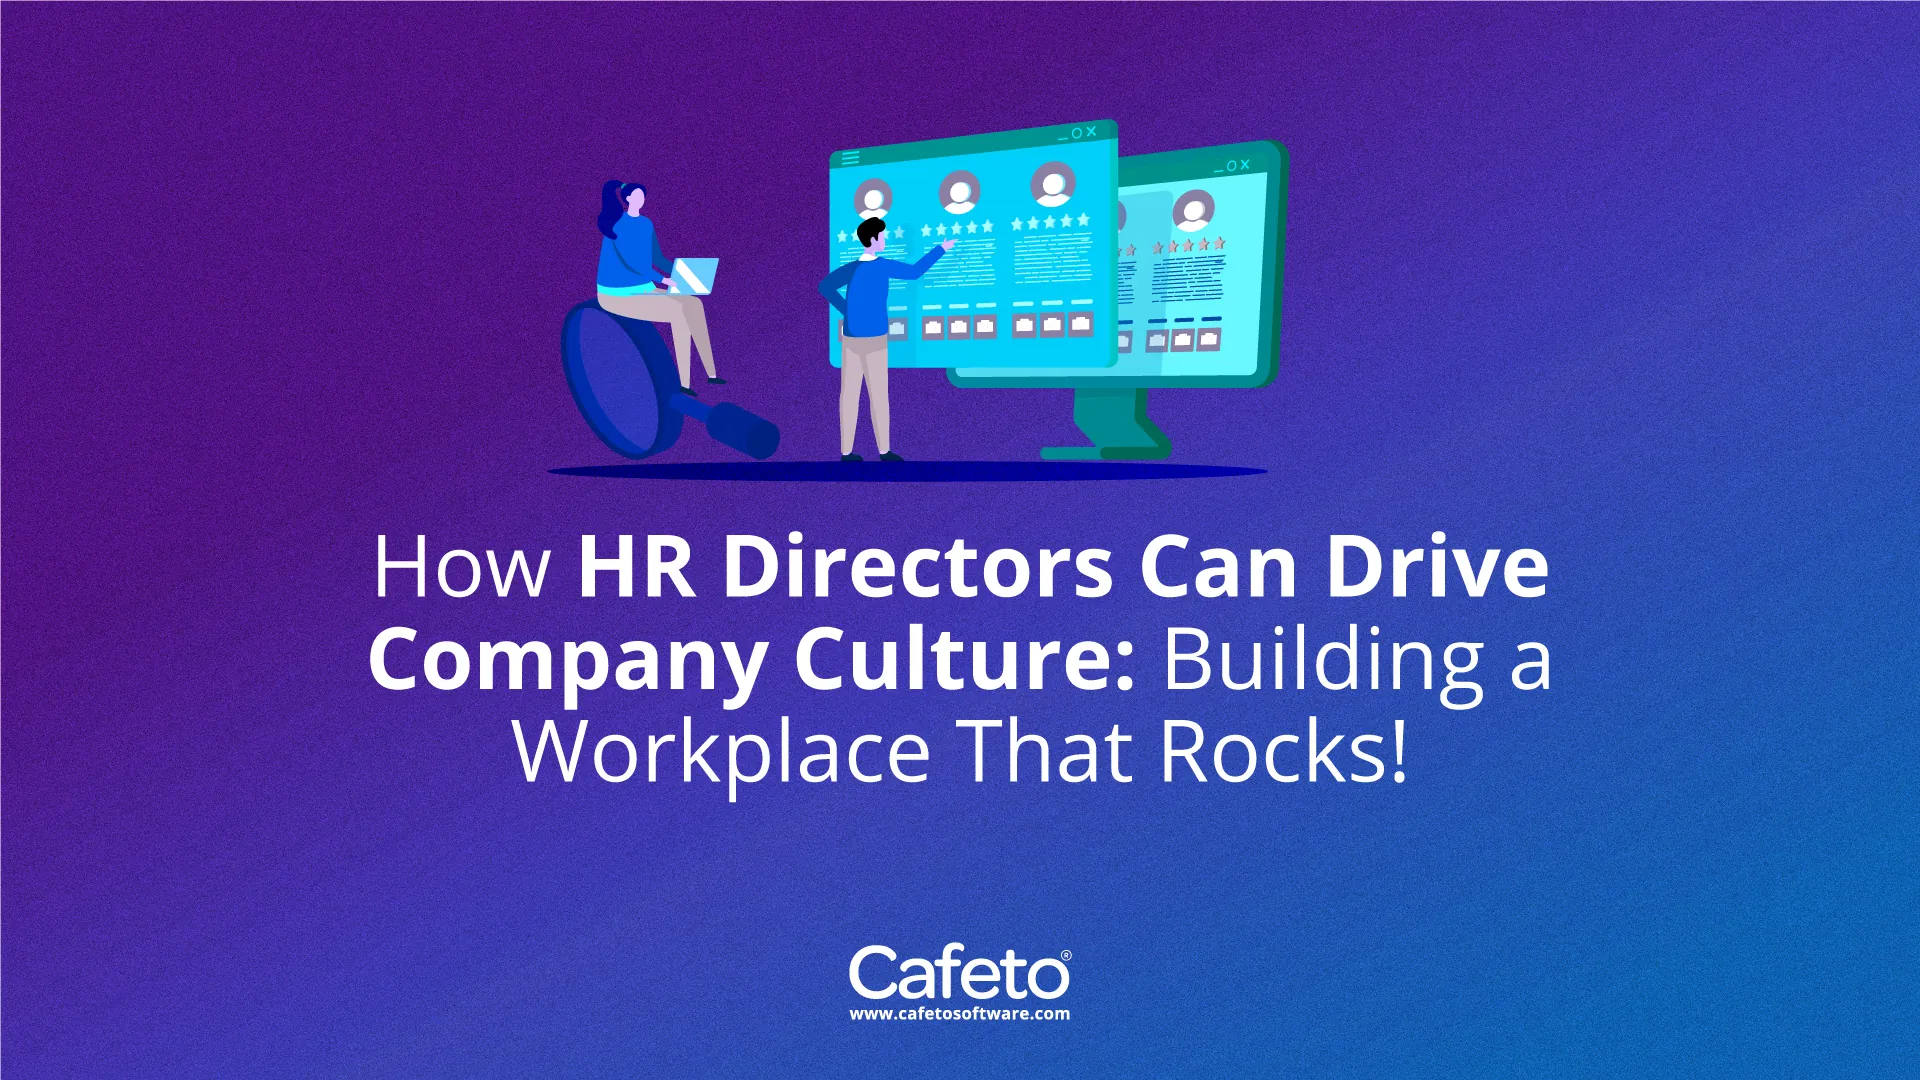 How HR Directors Can Drive Company Culture: Building a Workplace That Rocks!